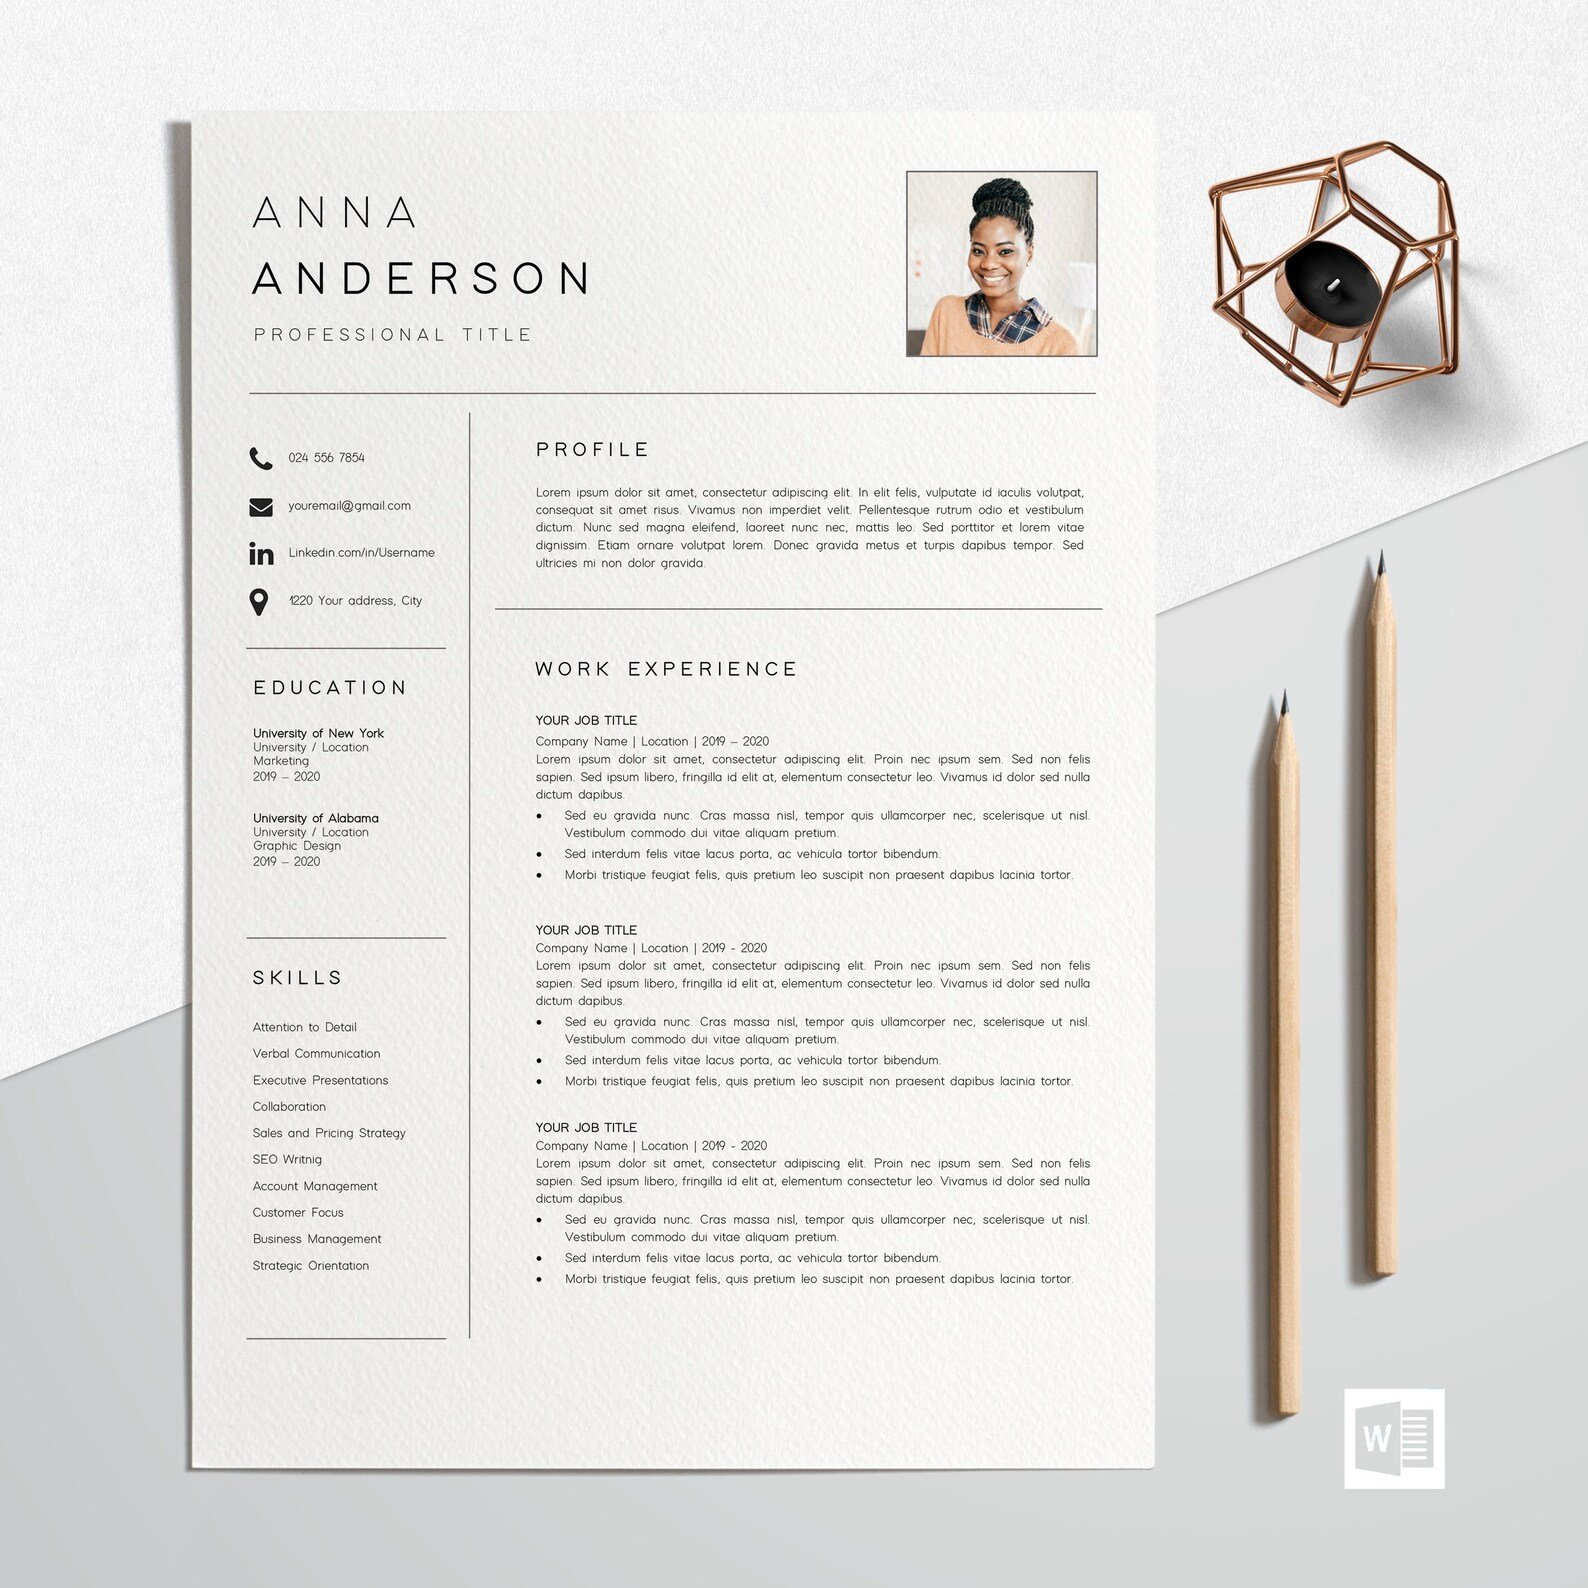 Resume Template CV Professional cover image.